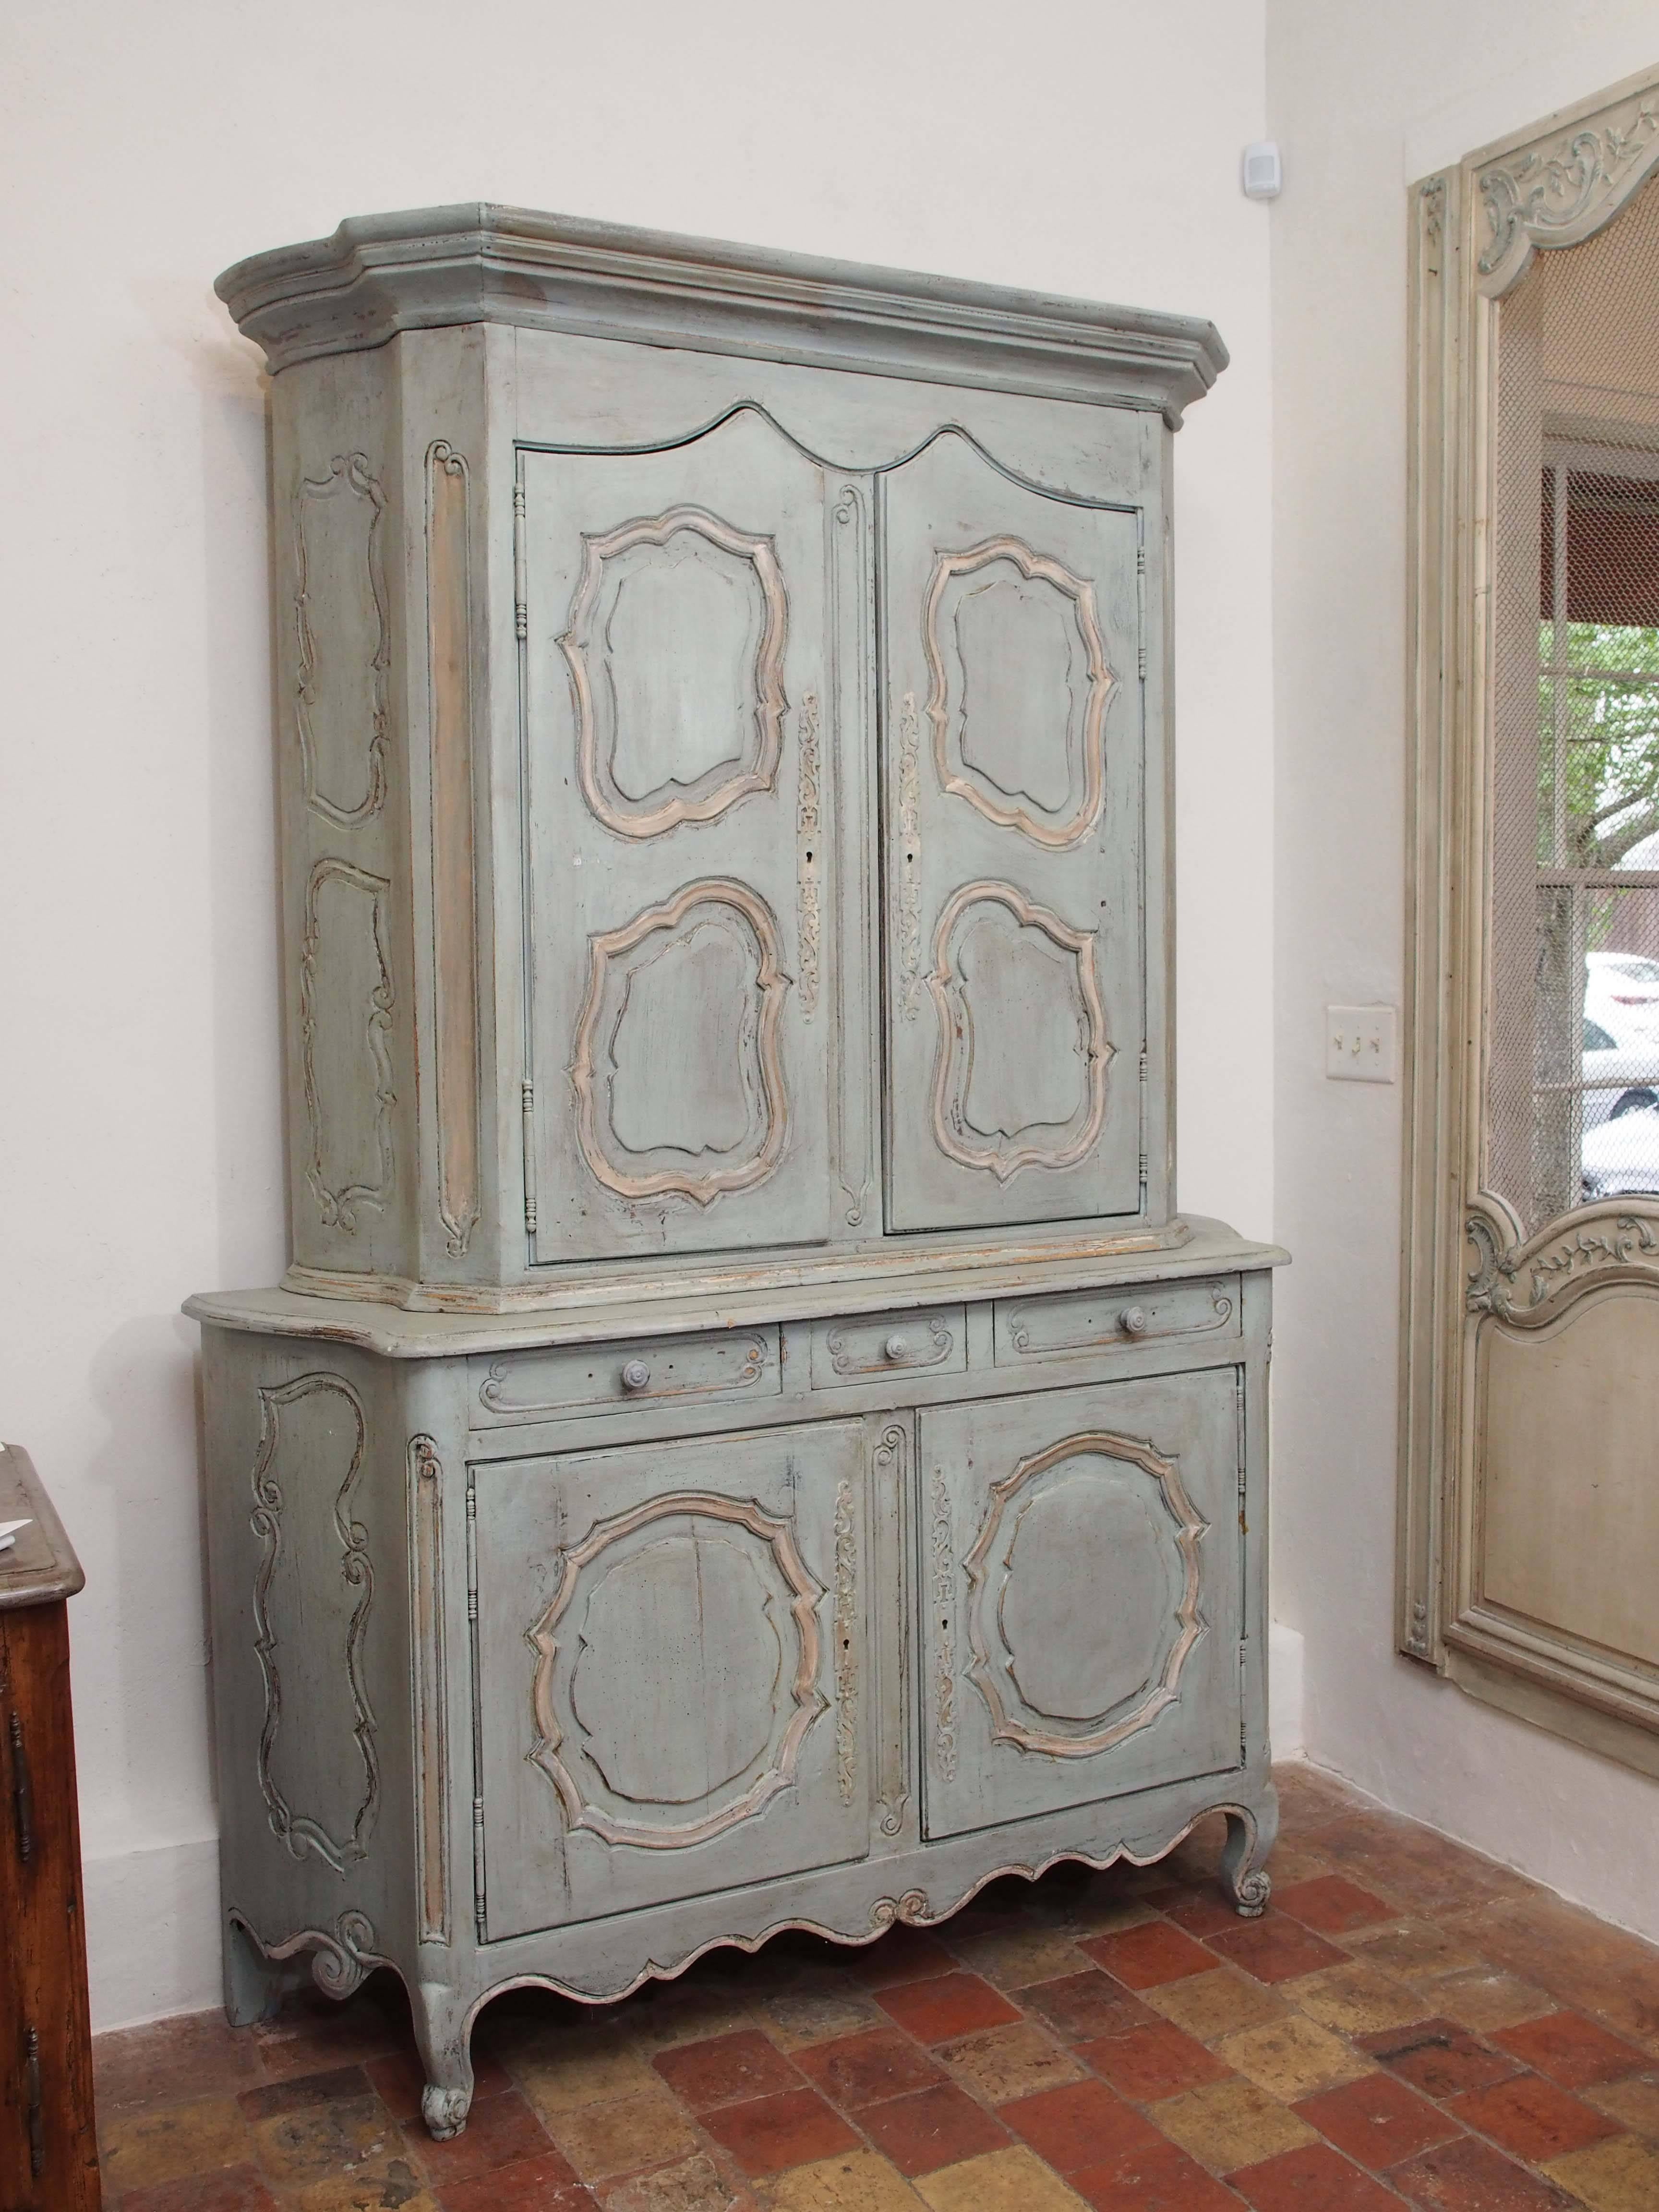 19th century French hand-painted and hand-carved buffet a deux corps in the Louis XV style with three drawers and four doors with iron hardware and wooded drawer pulls, circa 1840.